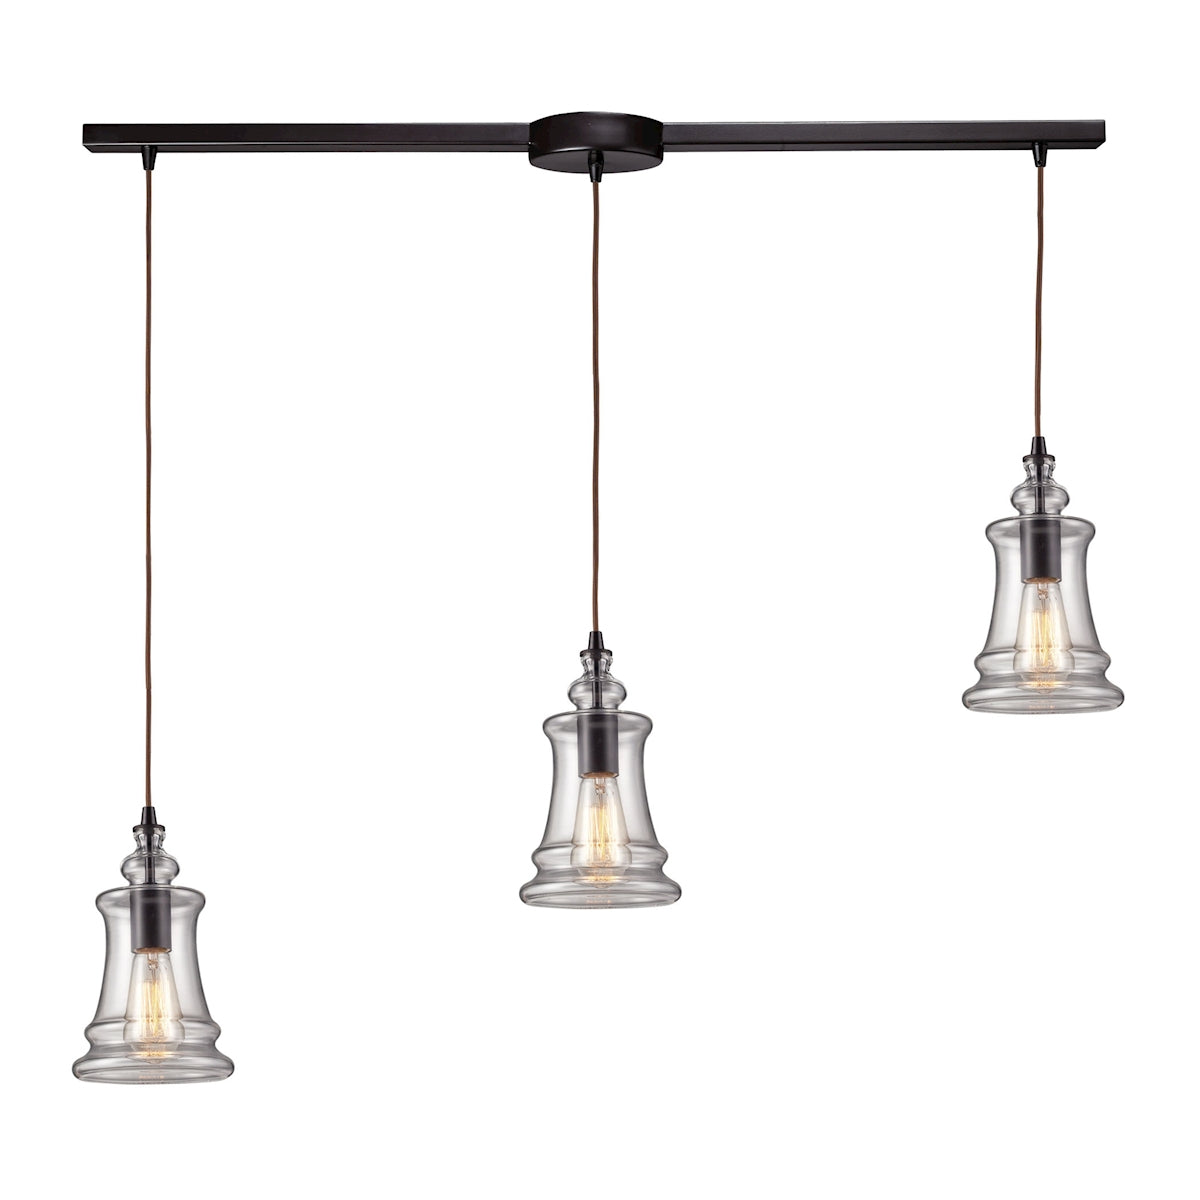 ELK Lighting 60042-3L Menlow Park 3-Light Linear Pendant Fixture in Oiled Bronze with Smoked Glass